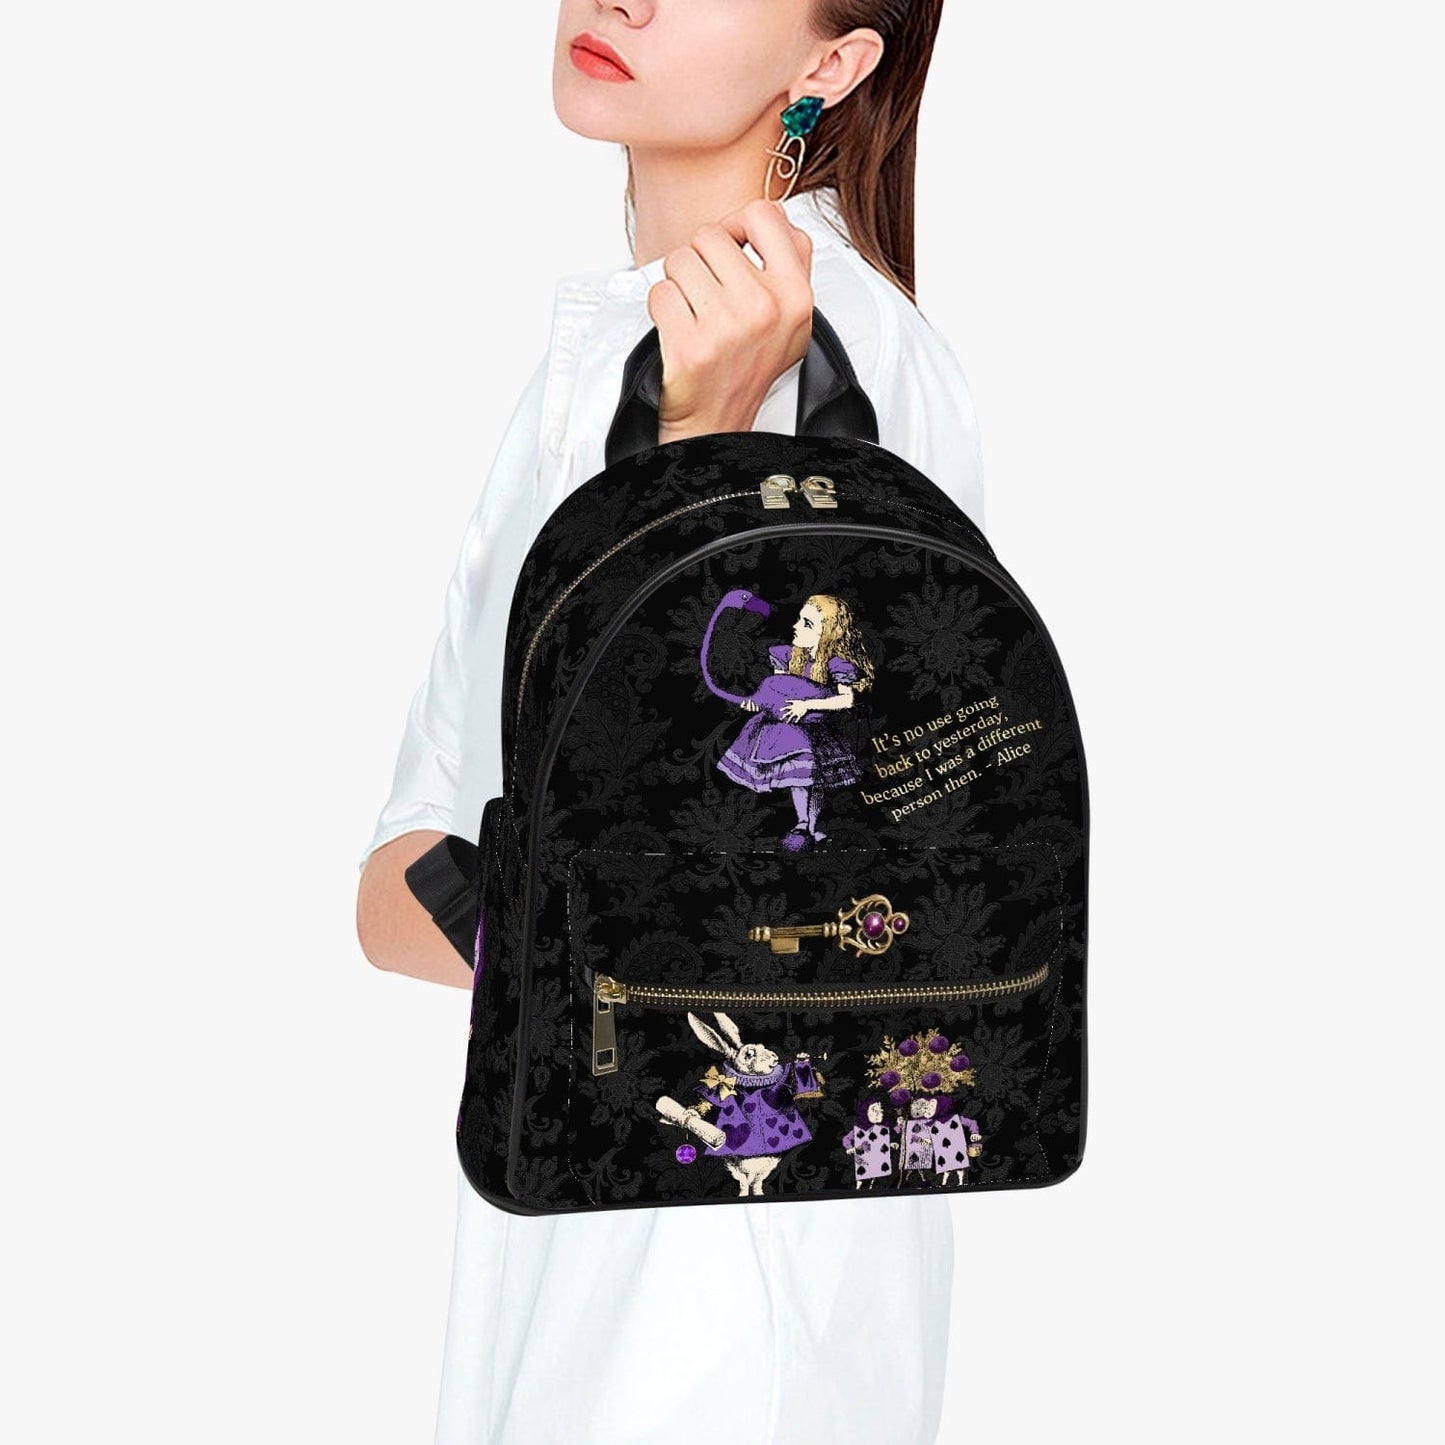 woman holding the black damask patterned mini backpack featuring Alice in Wonderland characters in purples and lilacs with a famous Alice quote